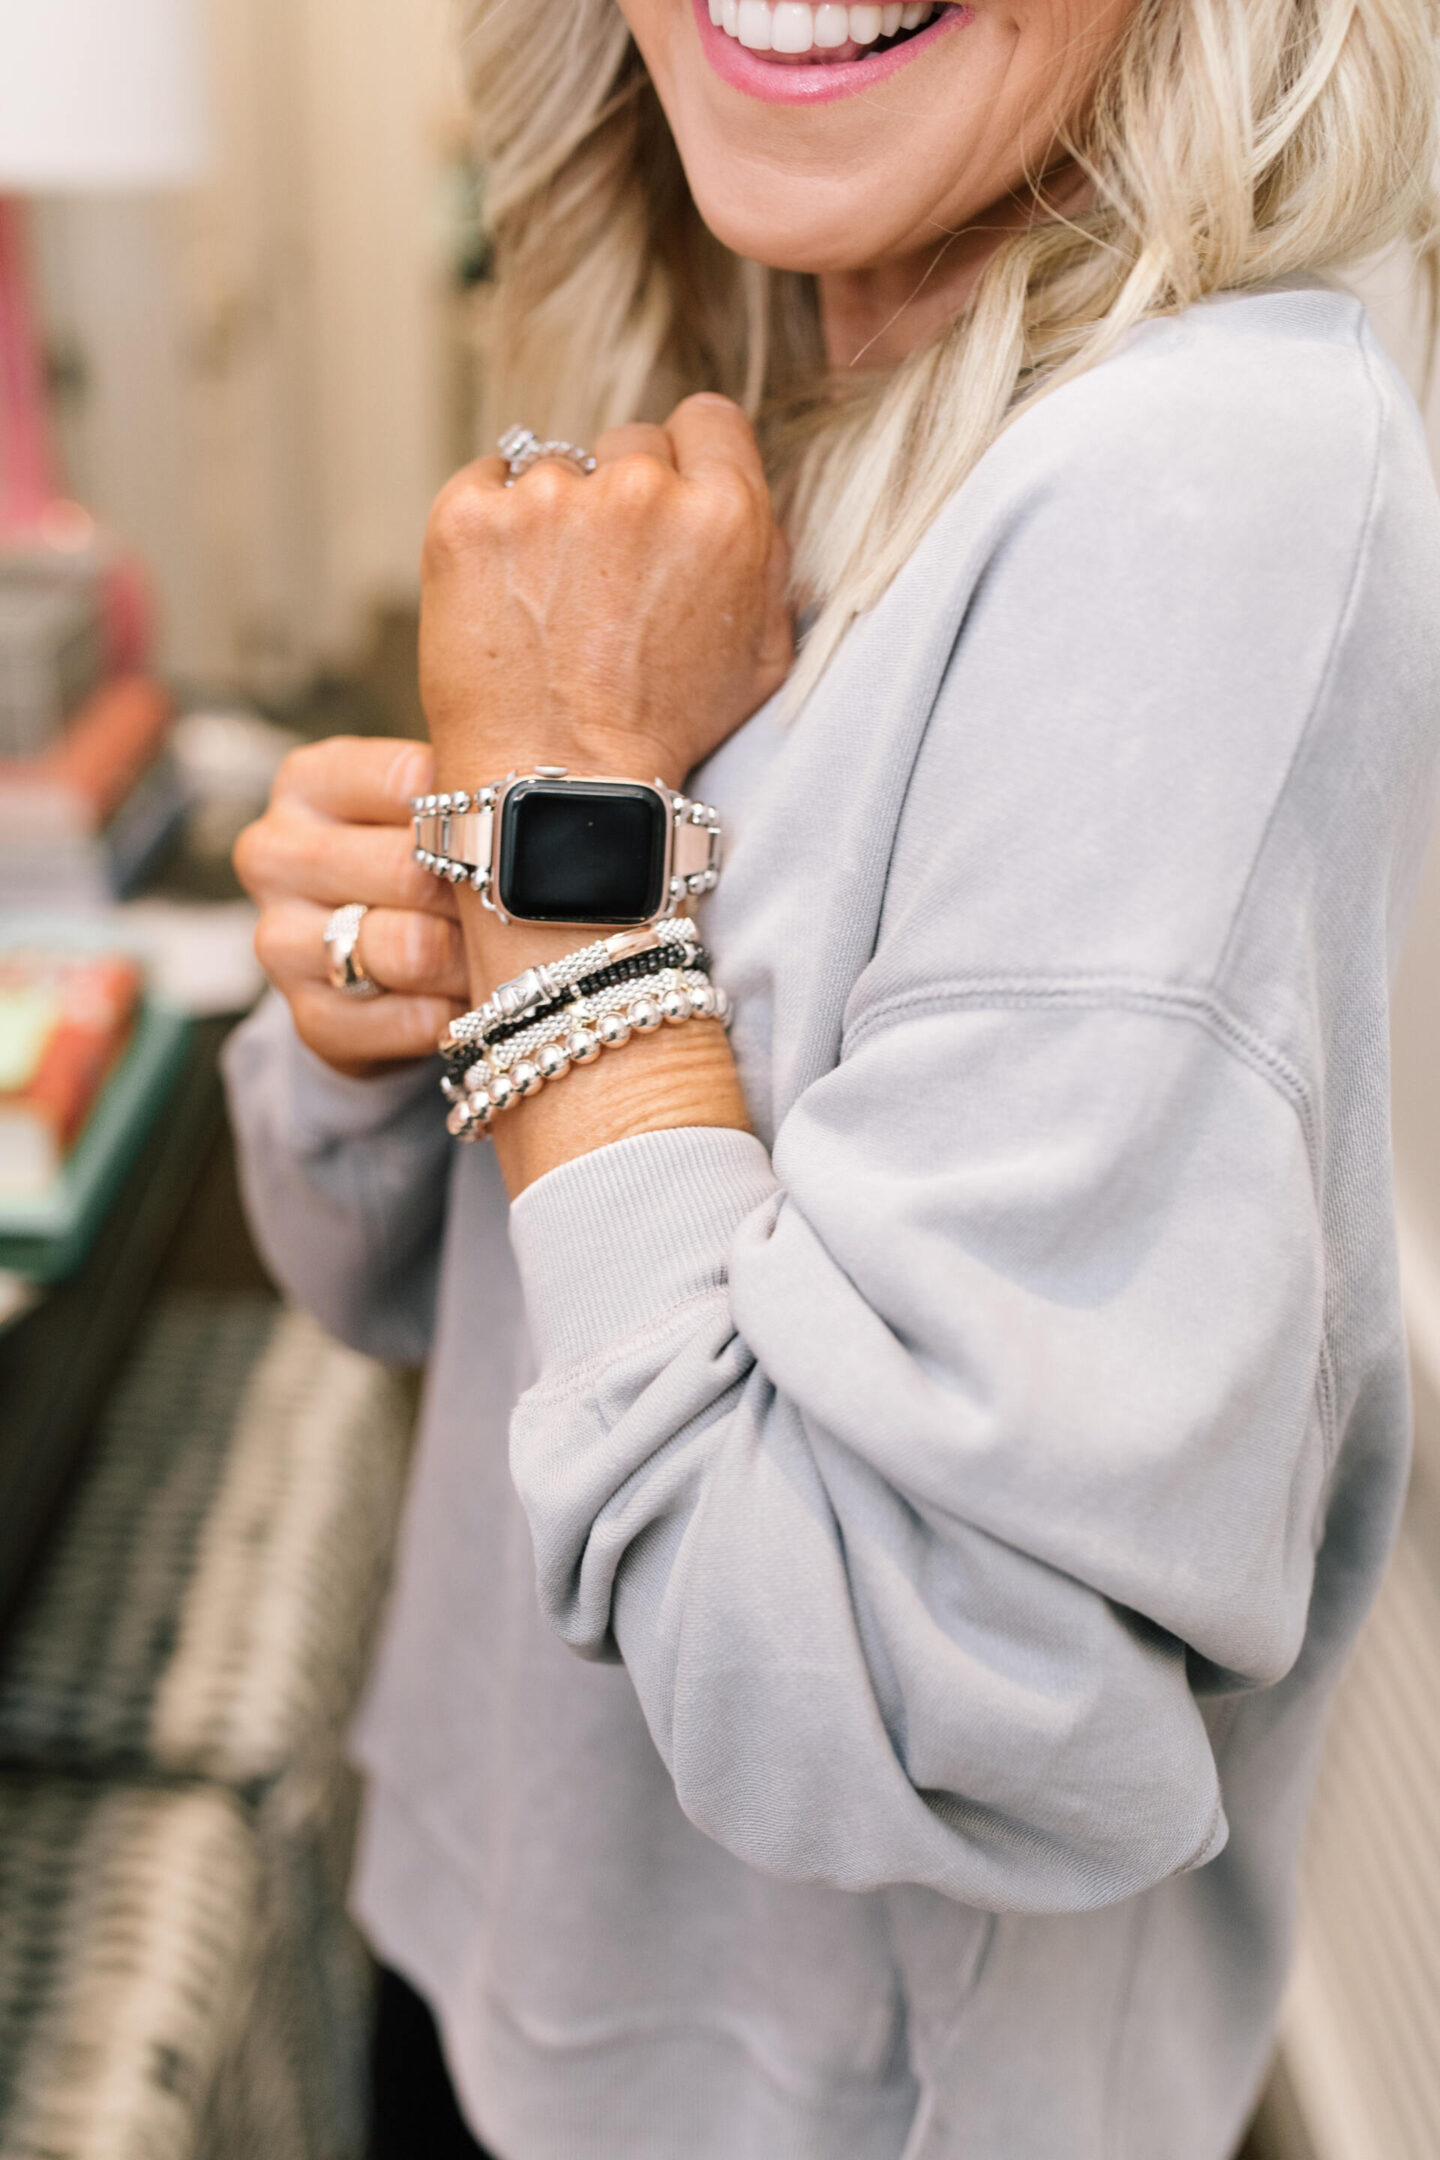 kulstof Displacement At opdage The Best Apple Watch Bands for Her | Fashion | Hello! Happiness